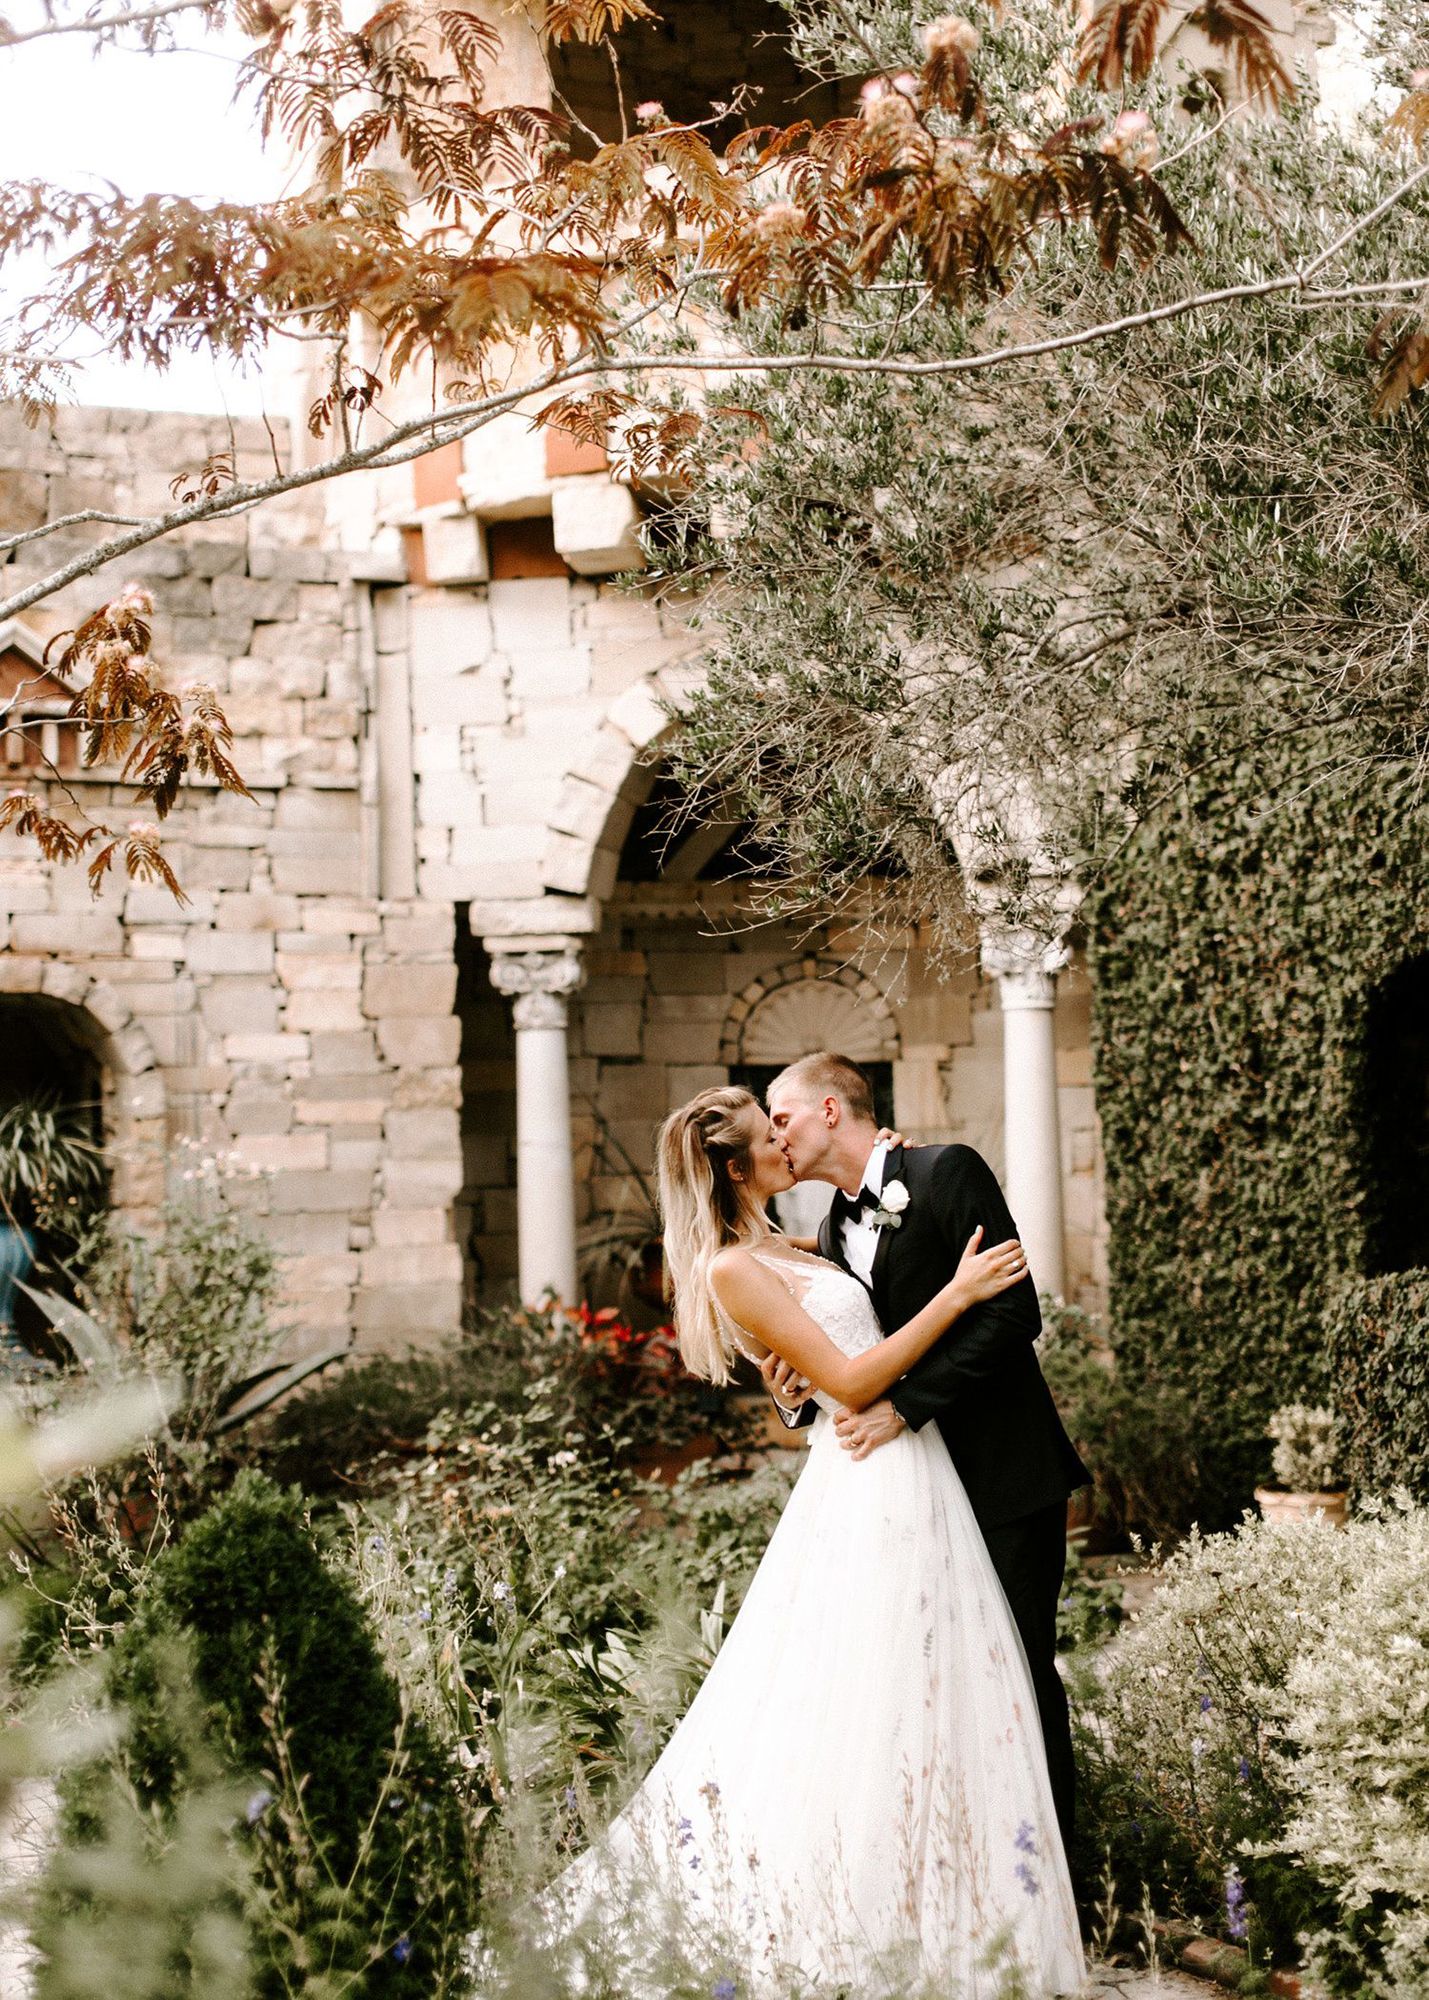 photo of a bride and groom in a black tuxedo kissing while outdoors in a lush garden setting